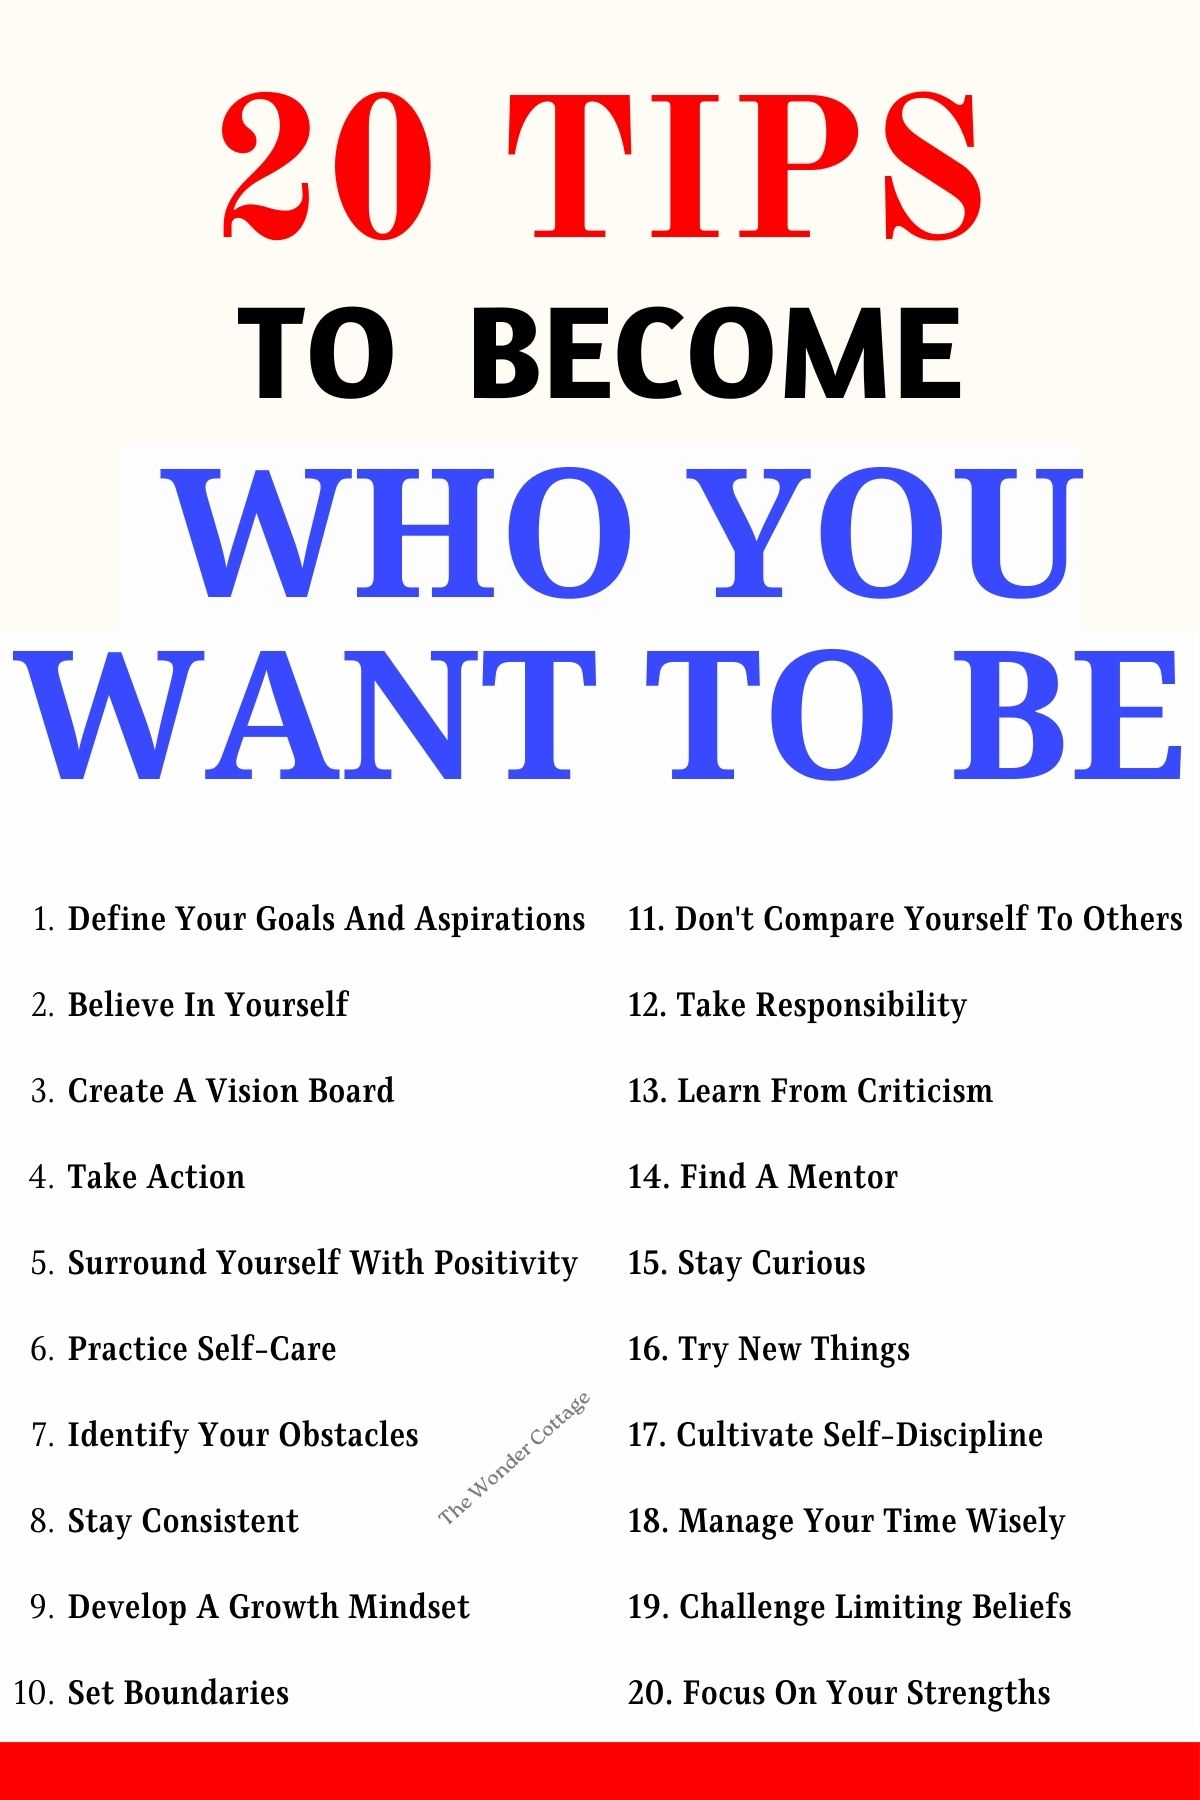 20 Tips To Become Who You Want To Be